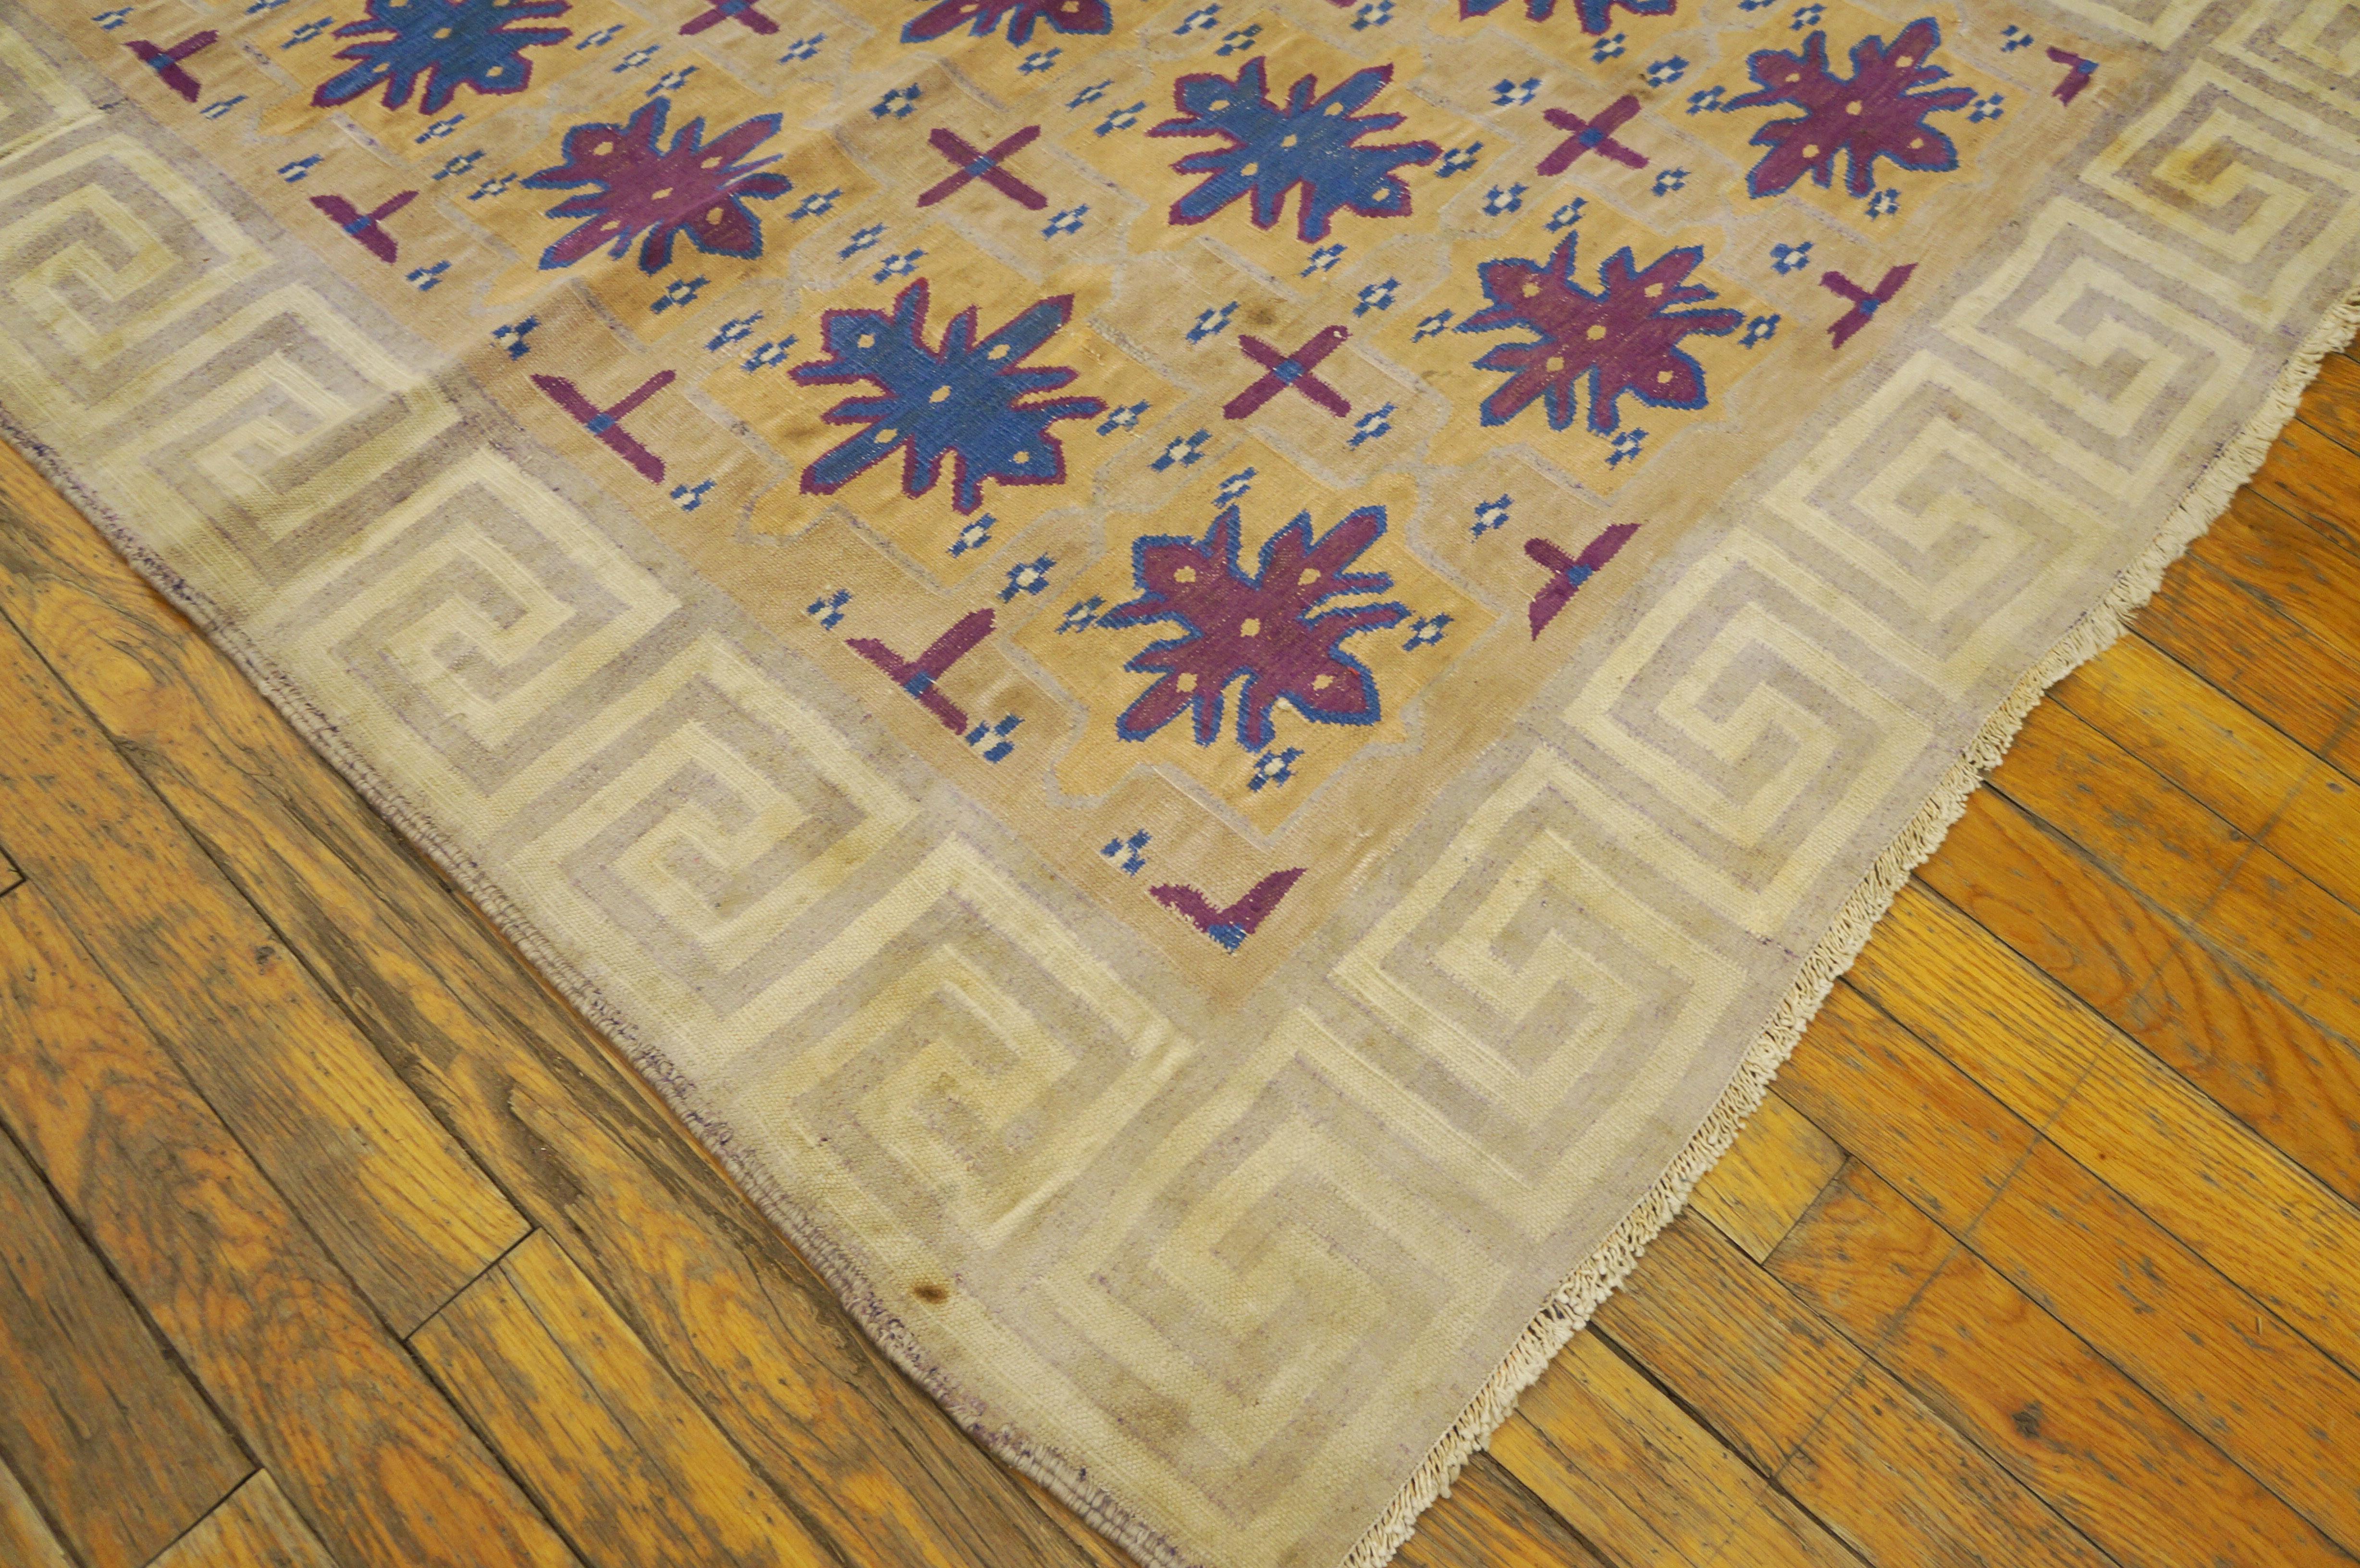 Early 20th Century Indian Cotton Dhurrie Carpet ( 3'8